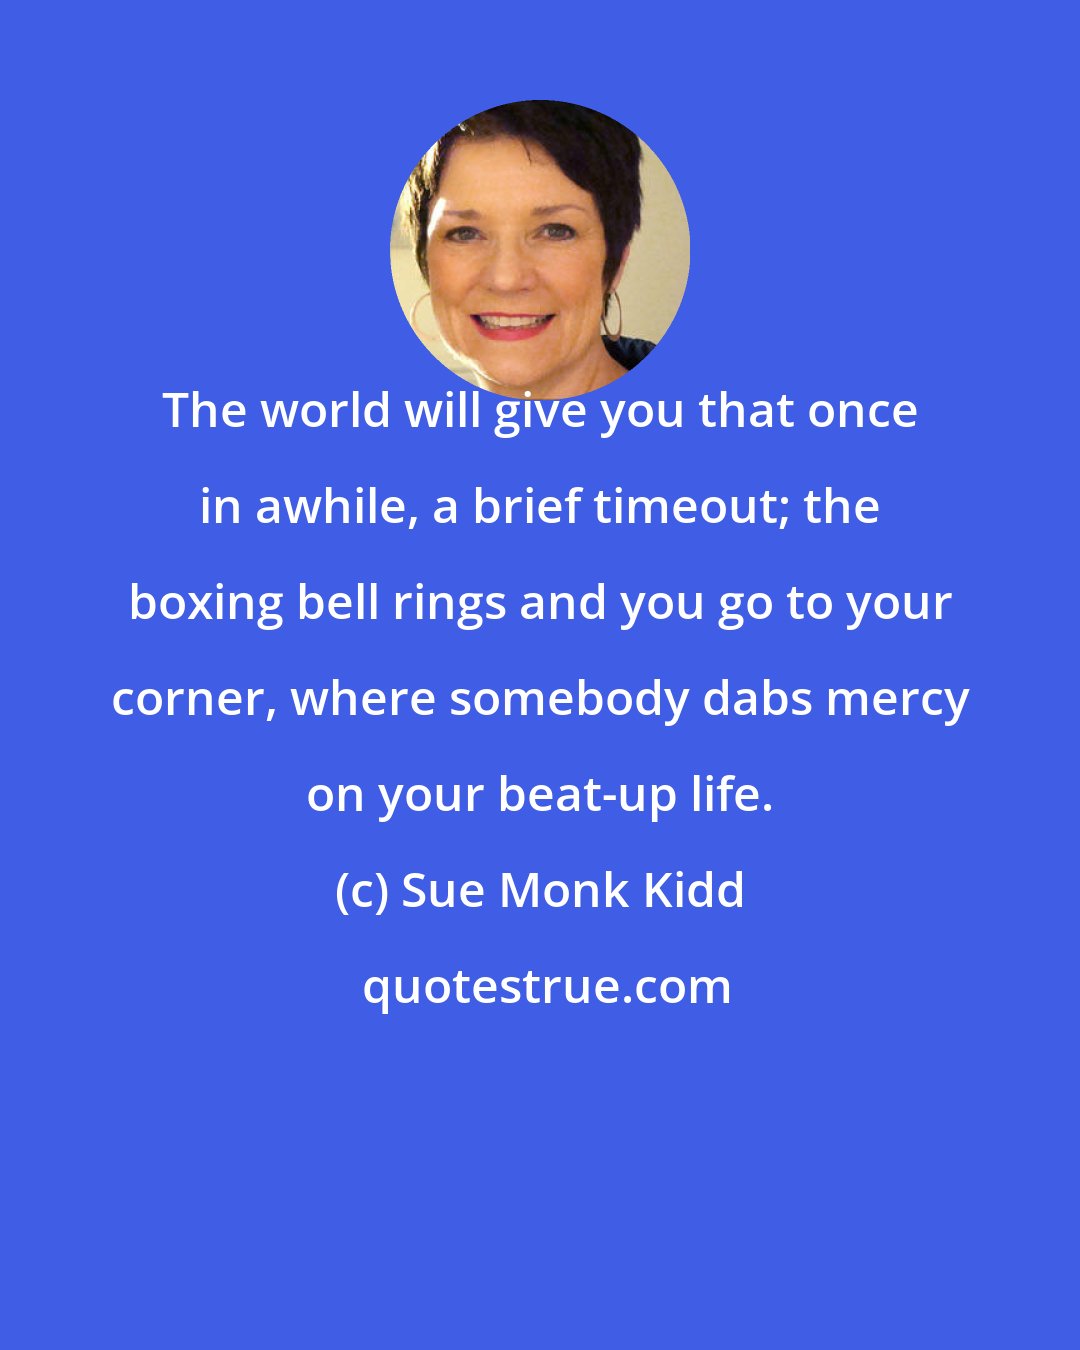 Sue Monk Kidd: The world will give you that once in awhile, a brief timeout; the boxing bell rings and you go to your corner, where somebody dabs mercy on your beat-up life.